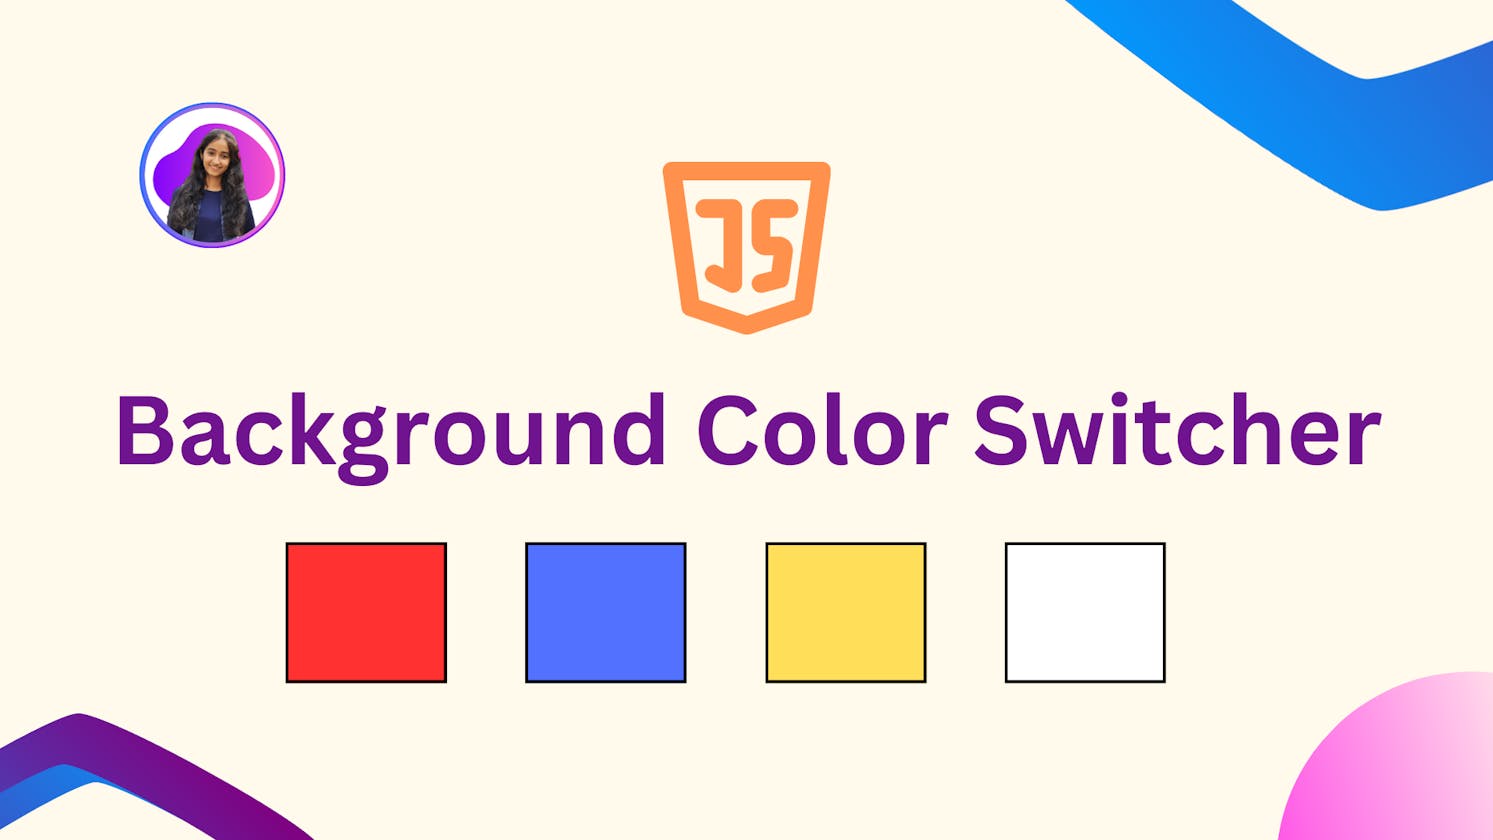 How To Make A Background Color Switcher Project Using JavaScript?